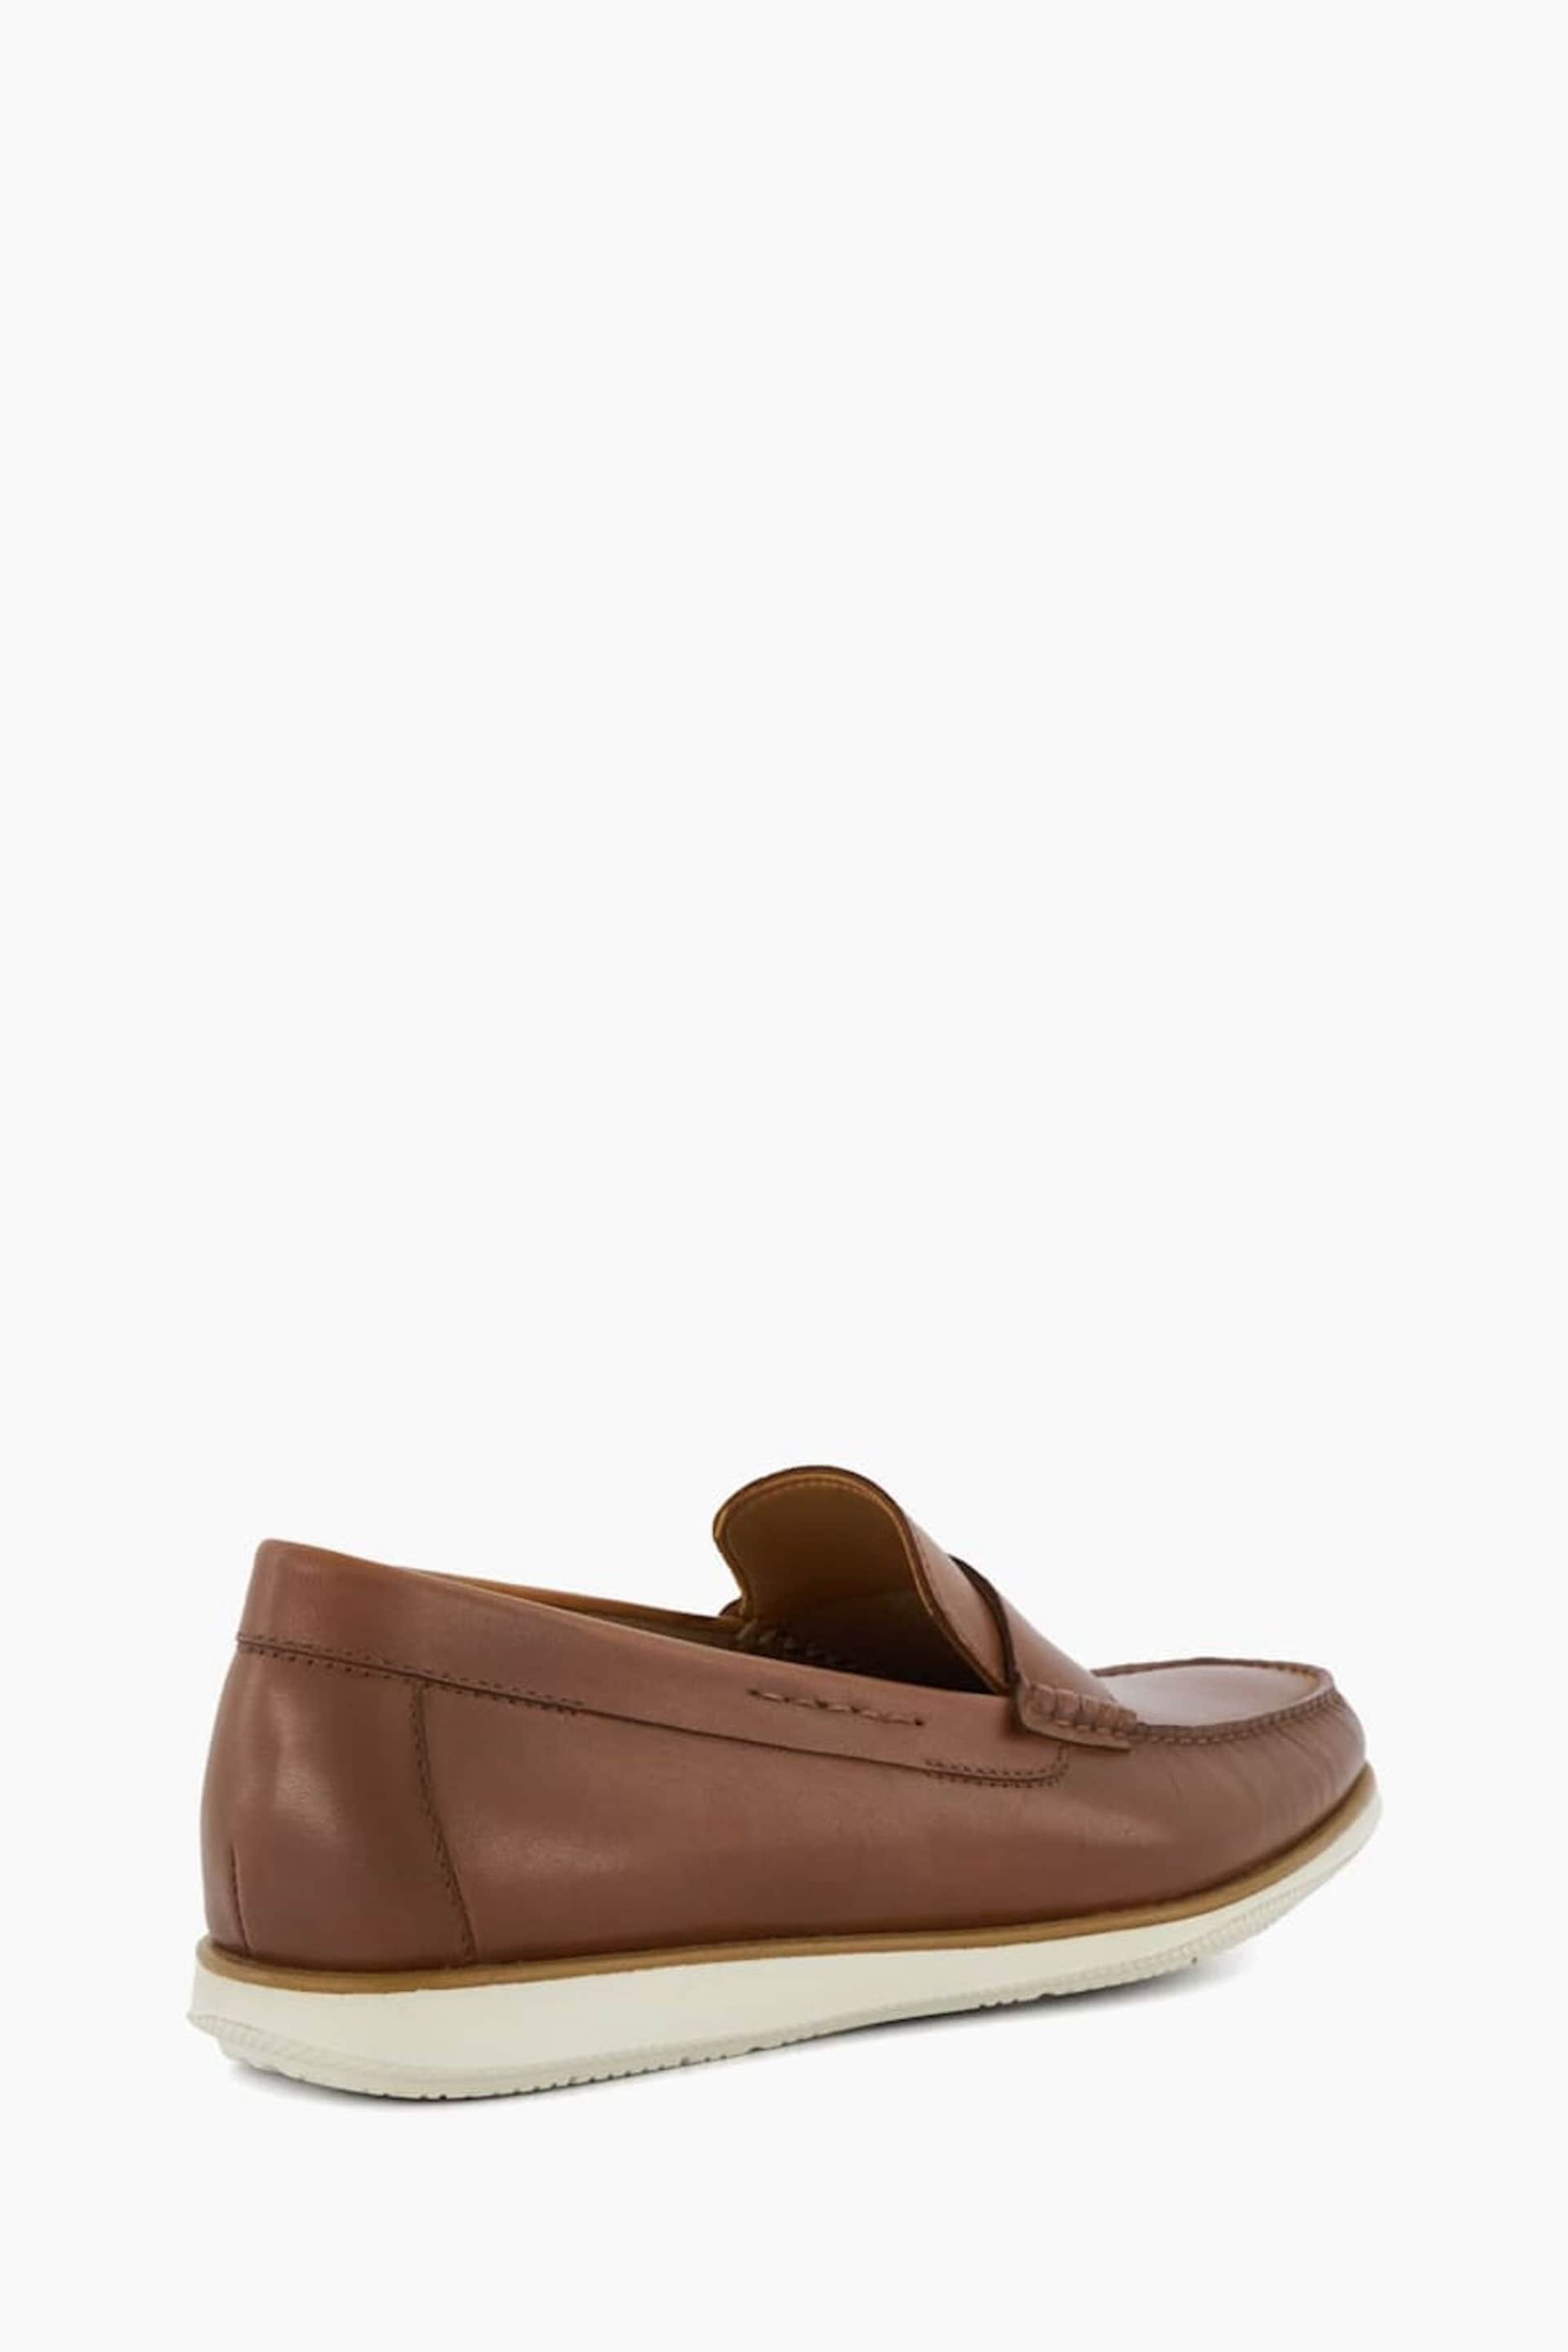 Dune London Brown Berkly Sole Loafers - Image 4 of 5